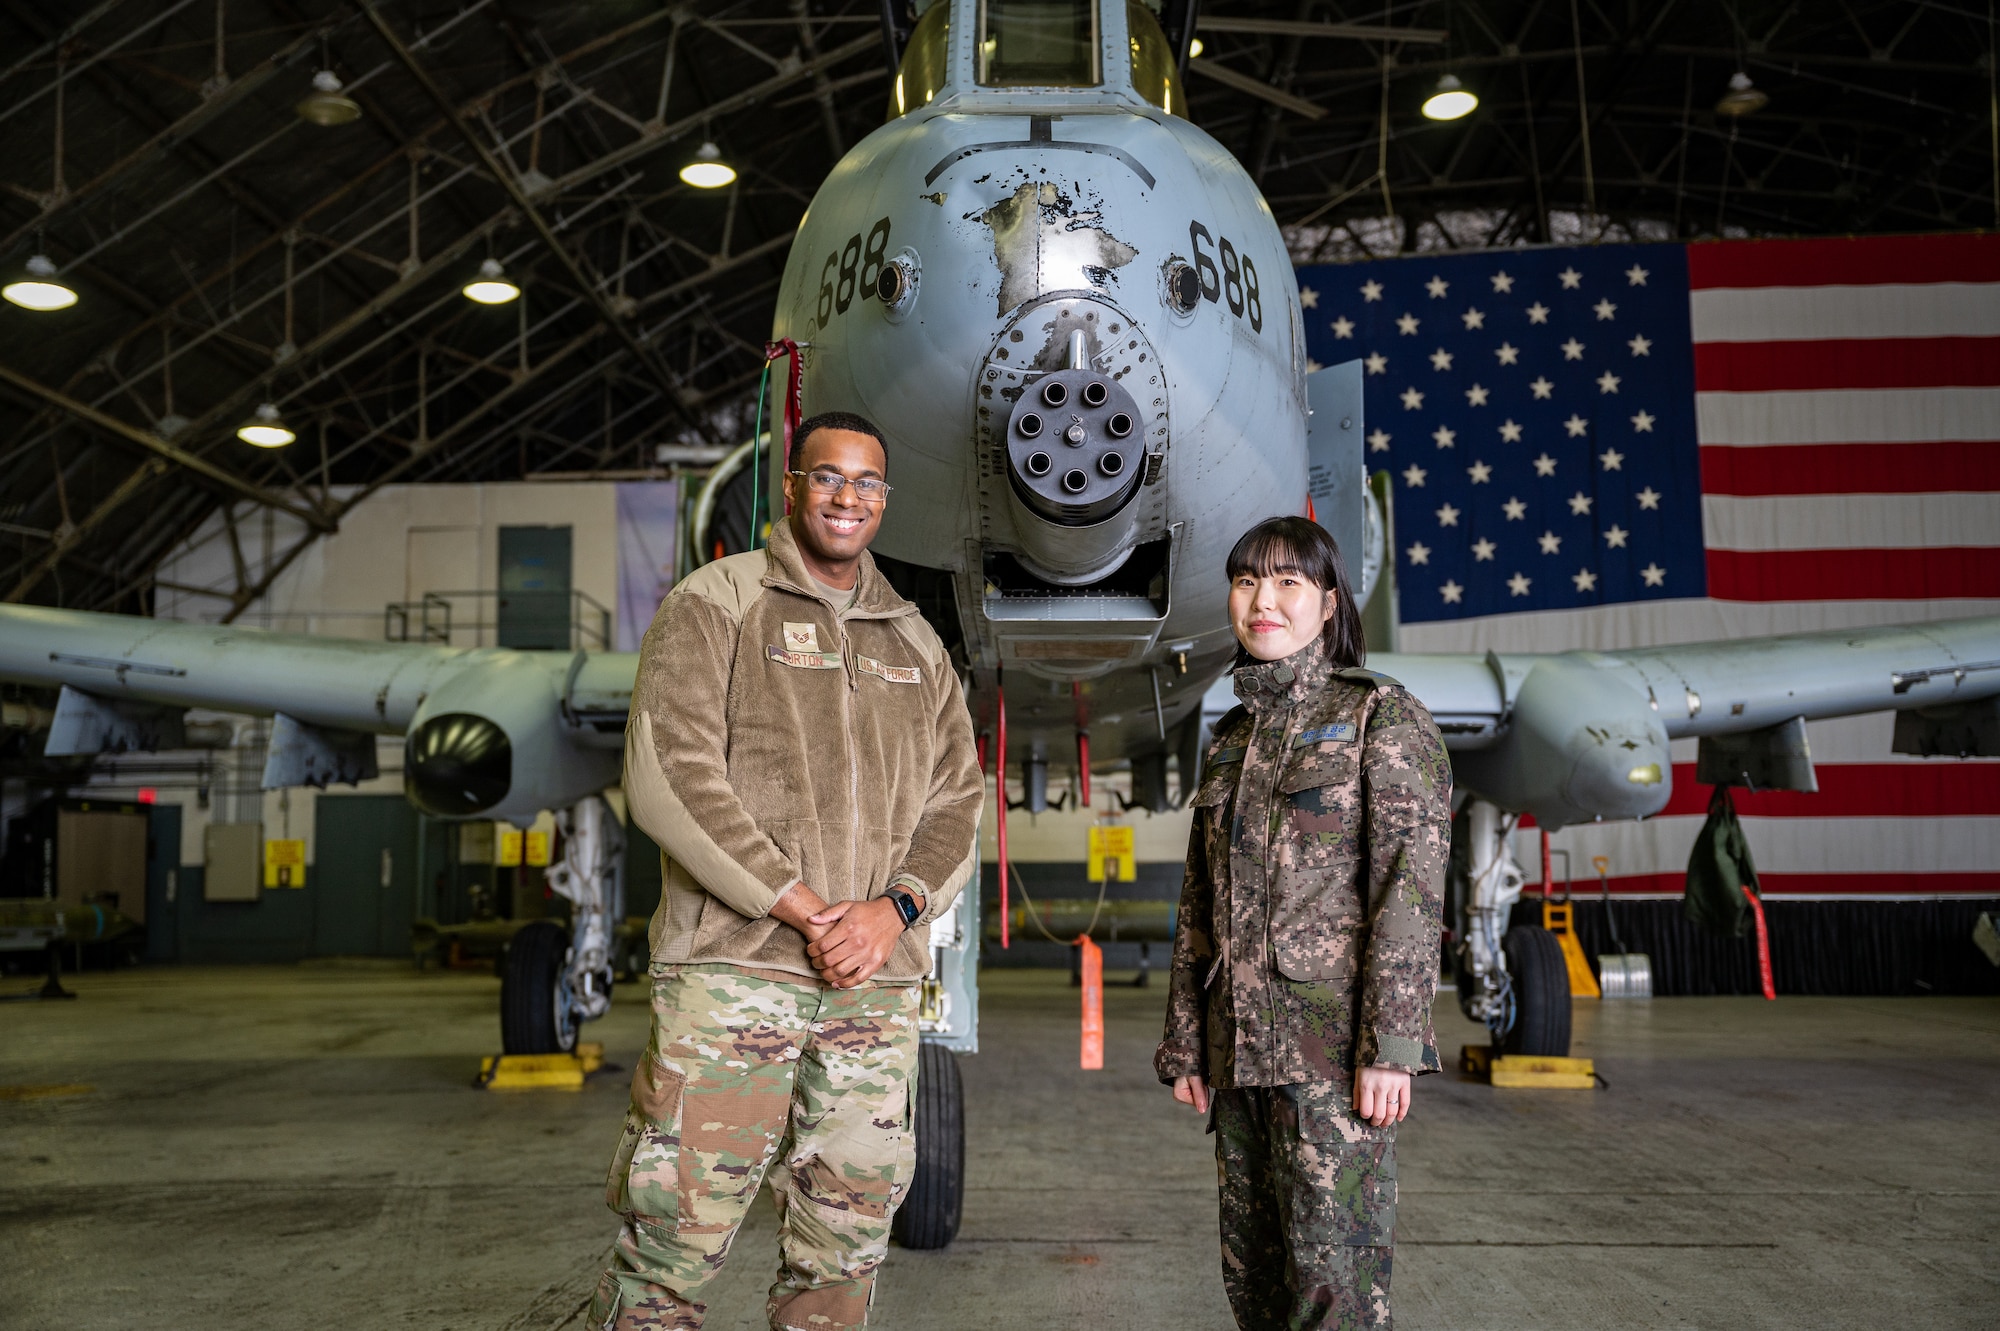 U.S. Air Force Staff Sgt. Darius Burton, left, 51st Communications Squadron client systems technician, and Republic of Korea Air Force Tech. Sgt. Lee, Gyu Bin, ROKAF communications intelligence specialist, pose for a photo in front of an A-10C Thunderbolt II during a Noncommissioned Officer Summit at Osan Air Base, Republic of Korea, Feb. 22, 2024. The summit paired 51st Fighter Wing Airmen with their ROKAF counterparts in similar career fields, aiming to foster mutual understanding of each other's operational tactics and enhance readiness for both peacetime and contingency scenarios. (U.S. Air Force photo by Staff Sgt. Thomas Sjoberg)